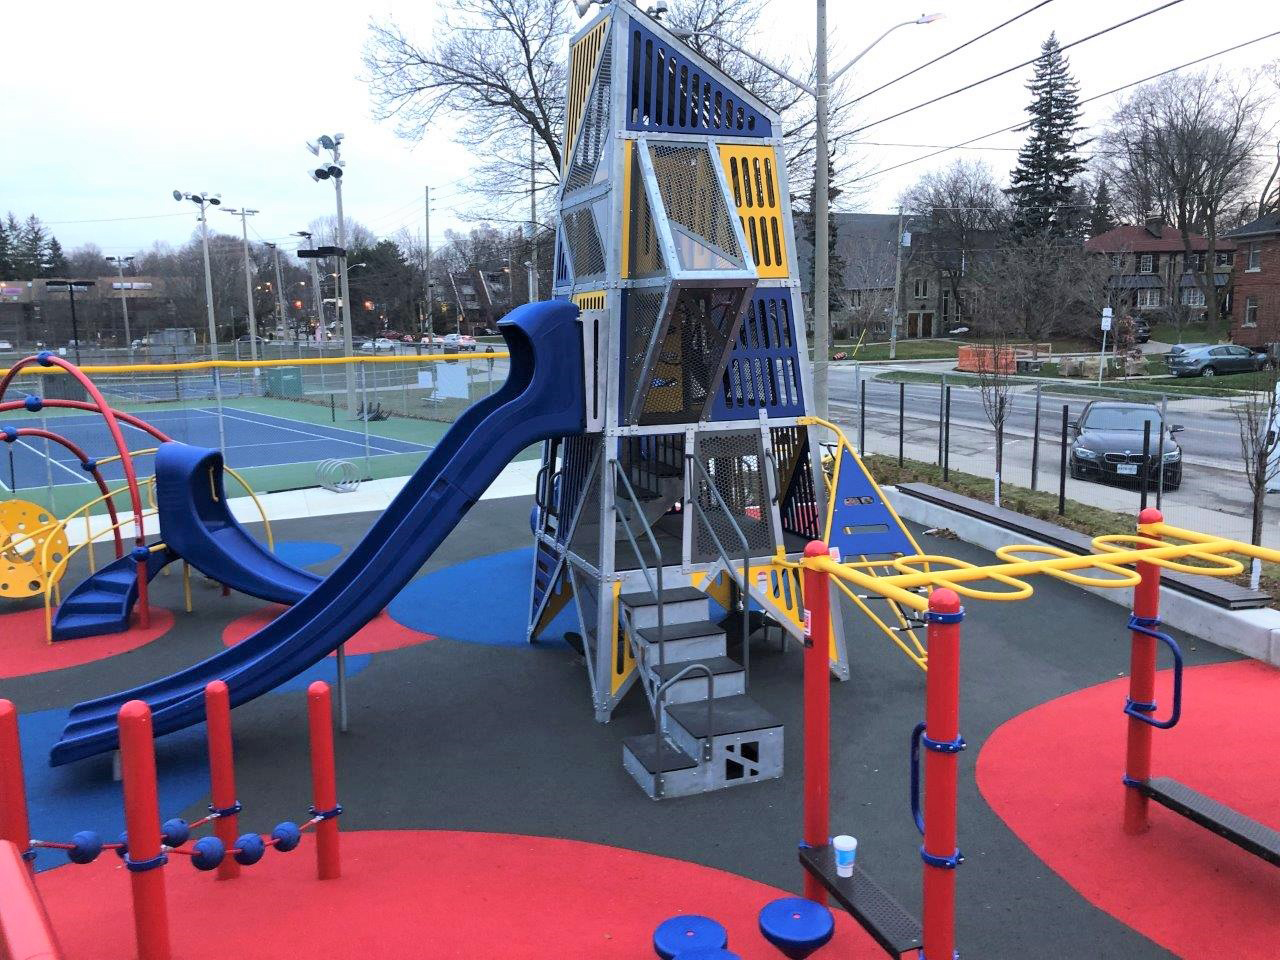 New playground at Trace Manes Park. Image shows large climbing structure.